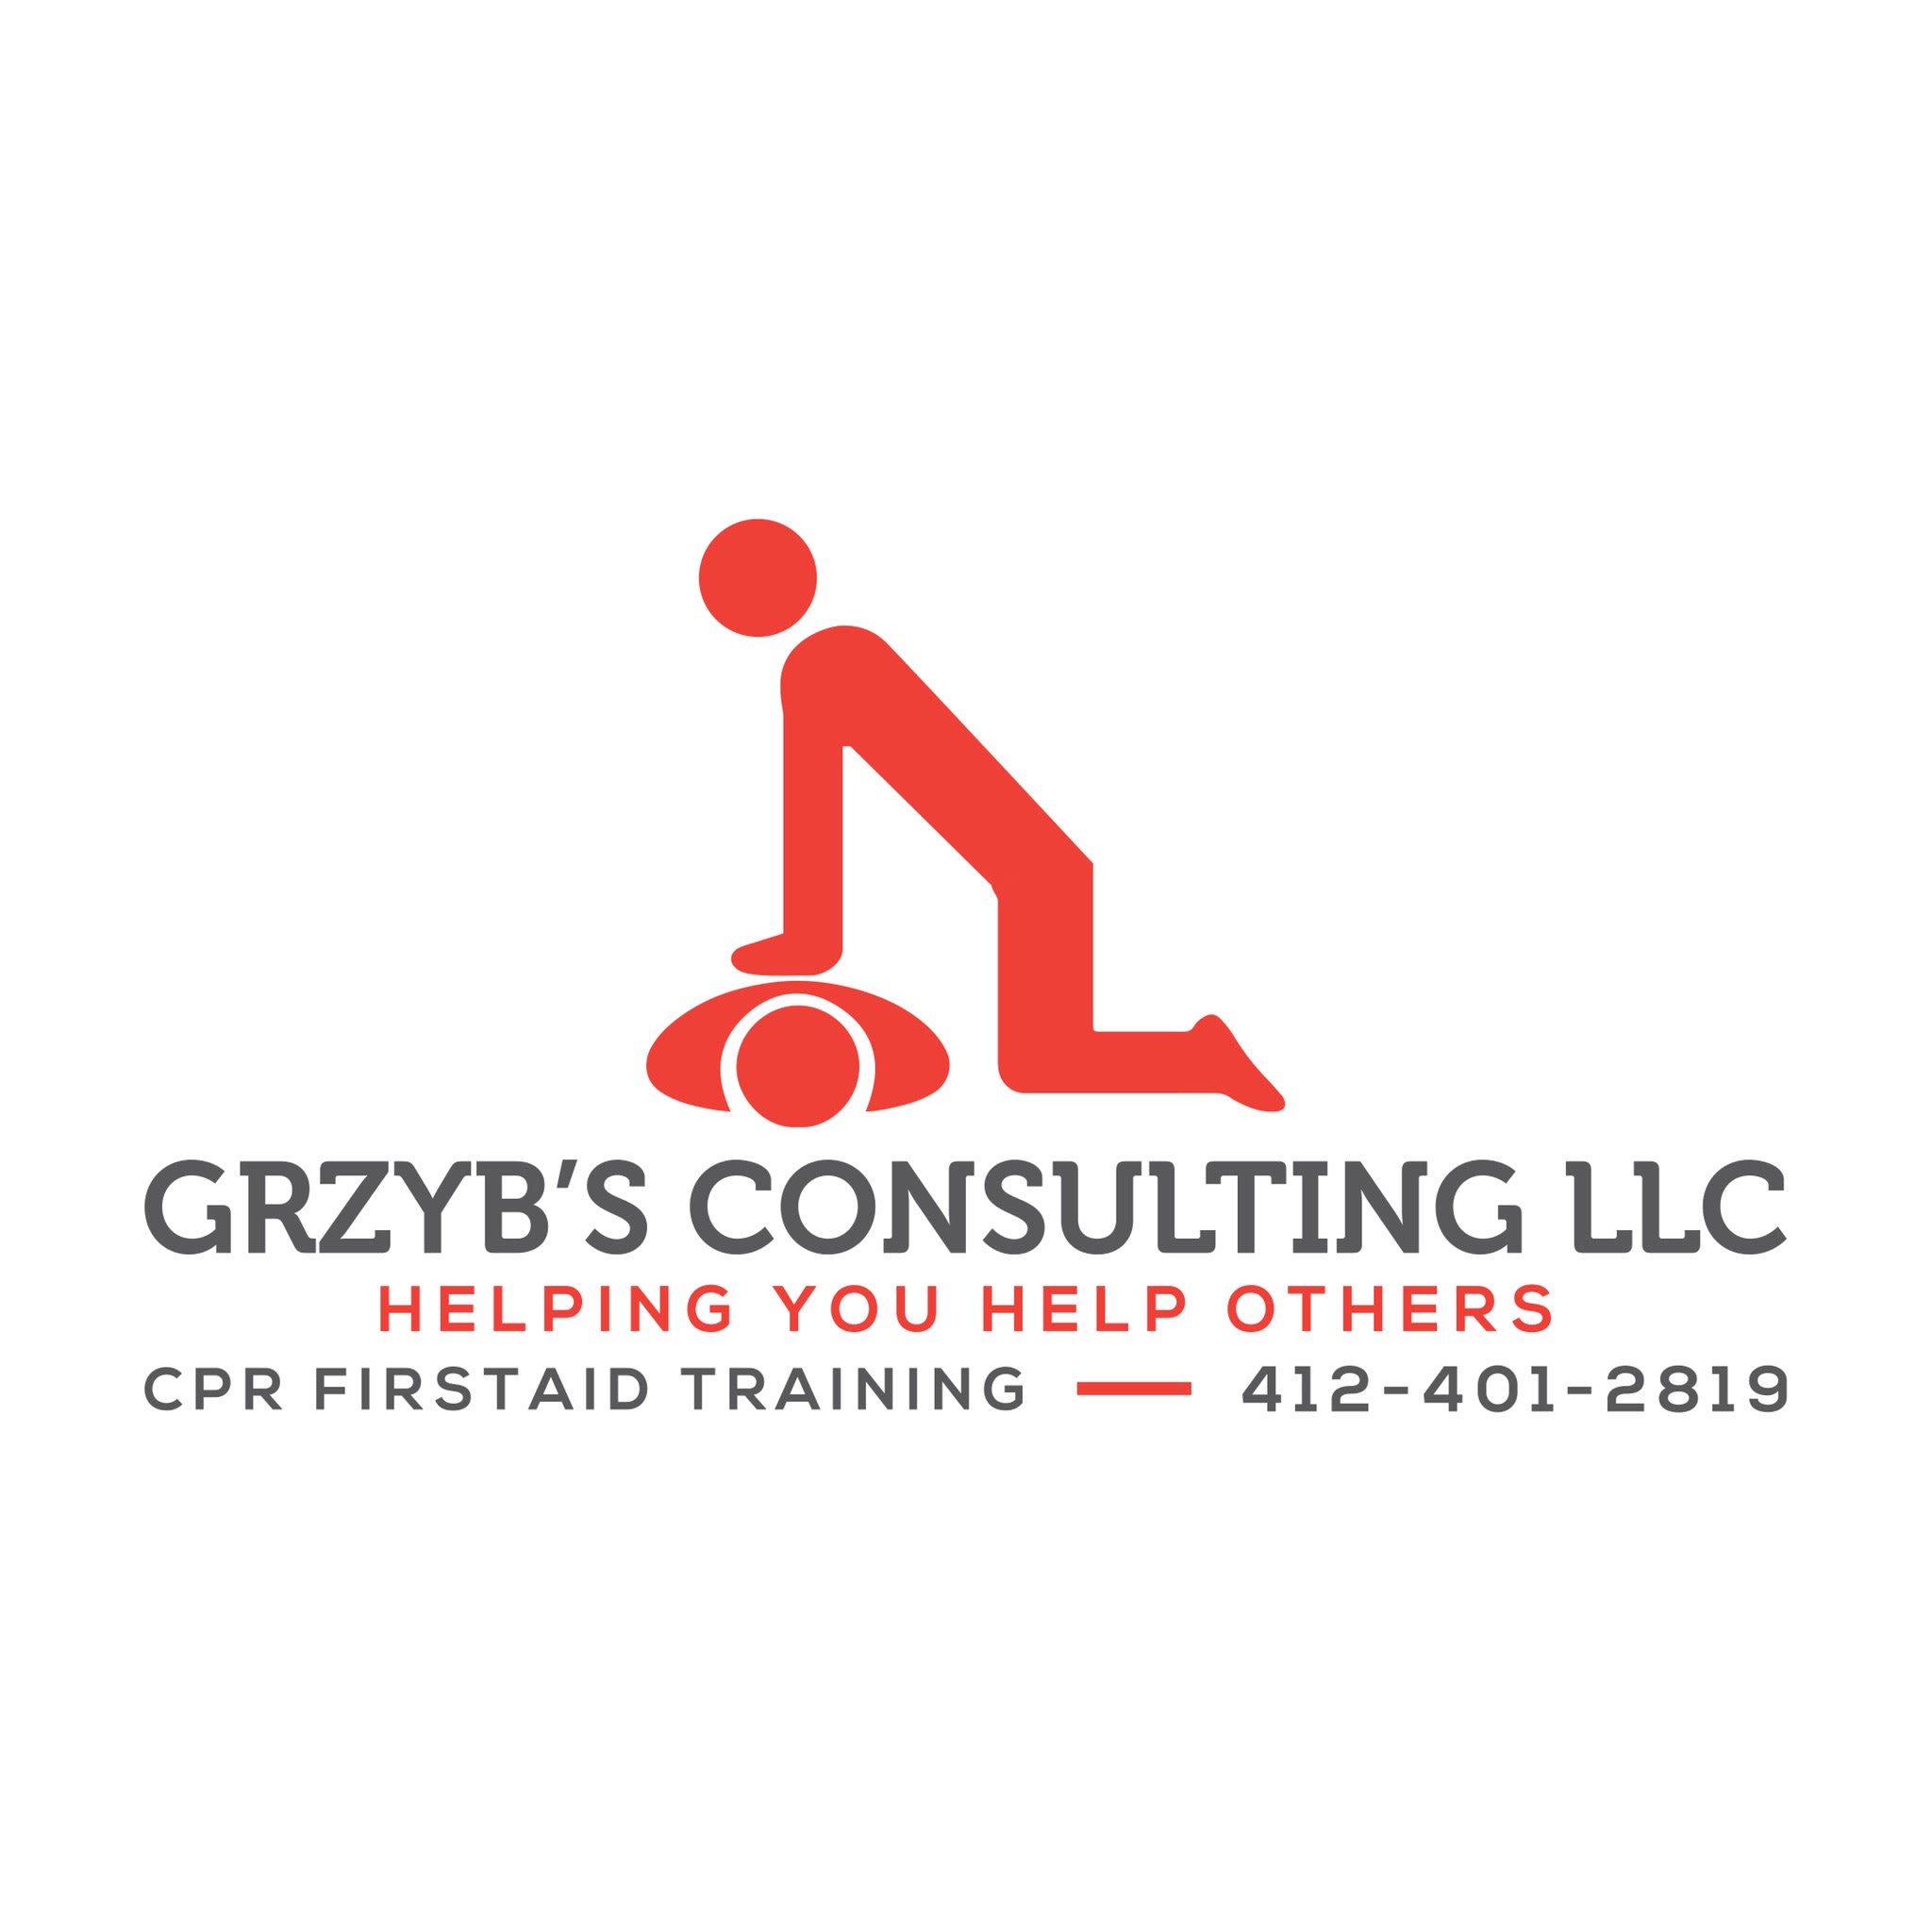 Grzyb’s Consulting